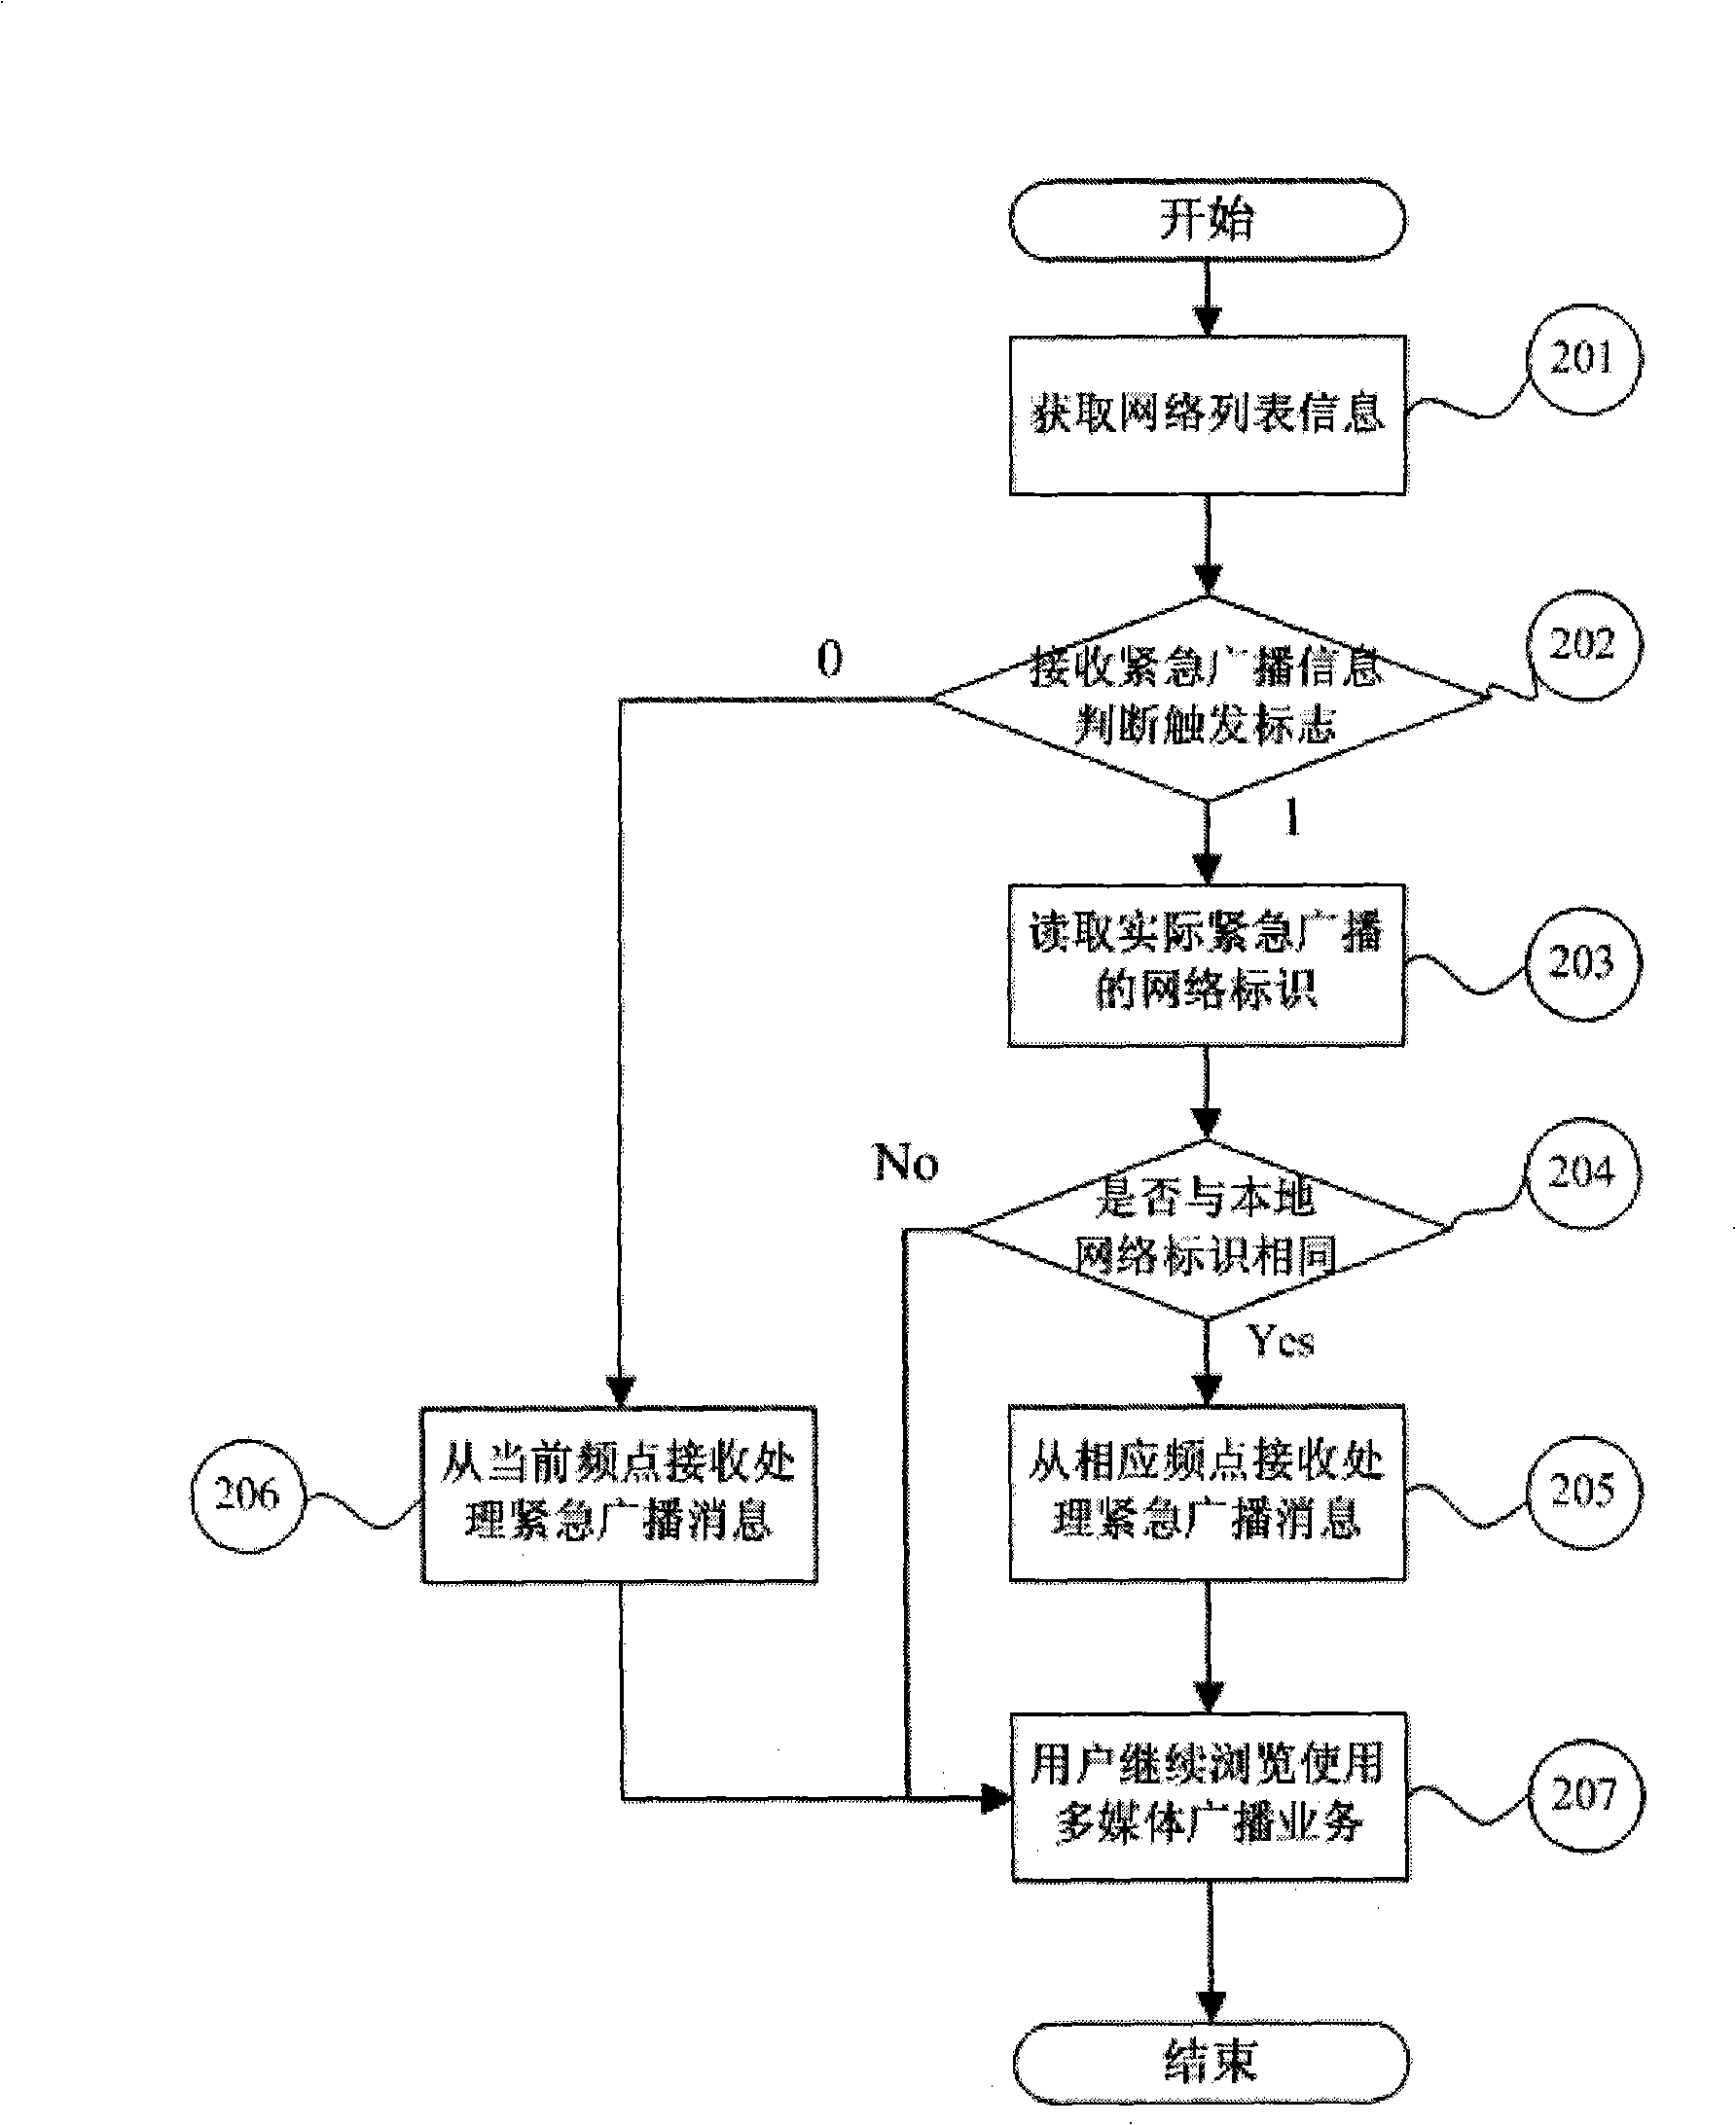 Method for conveying locality emergency broadcast message